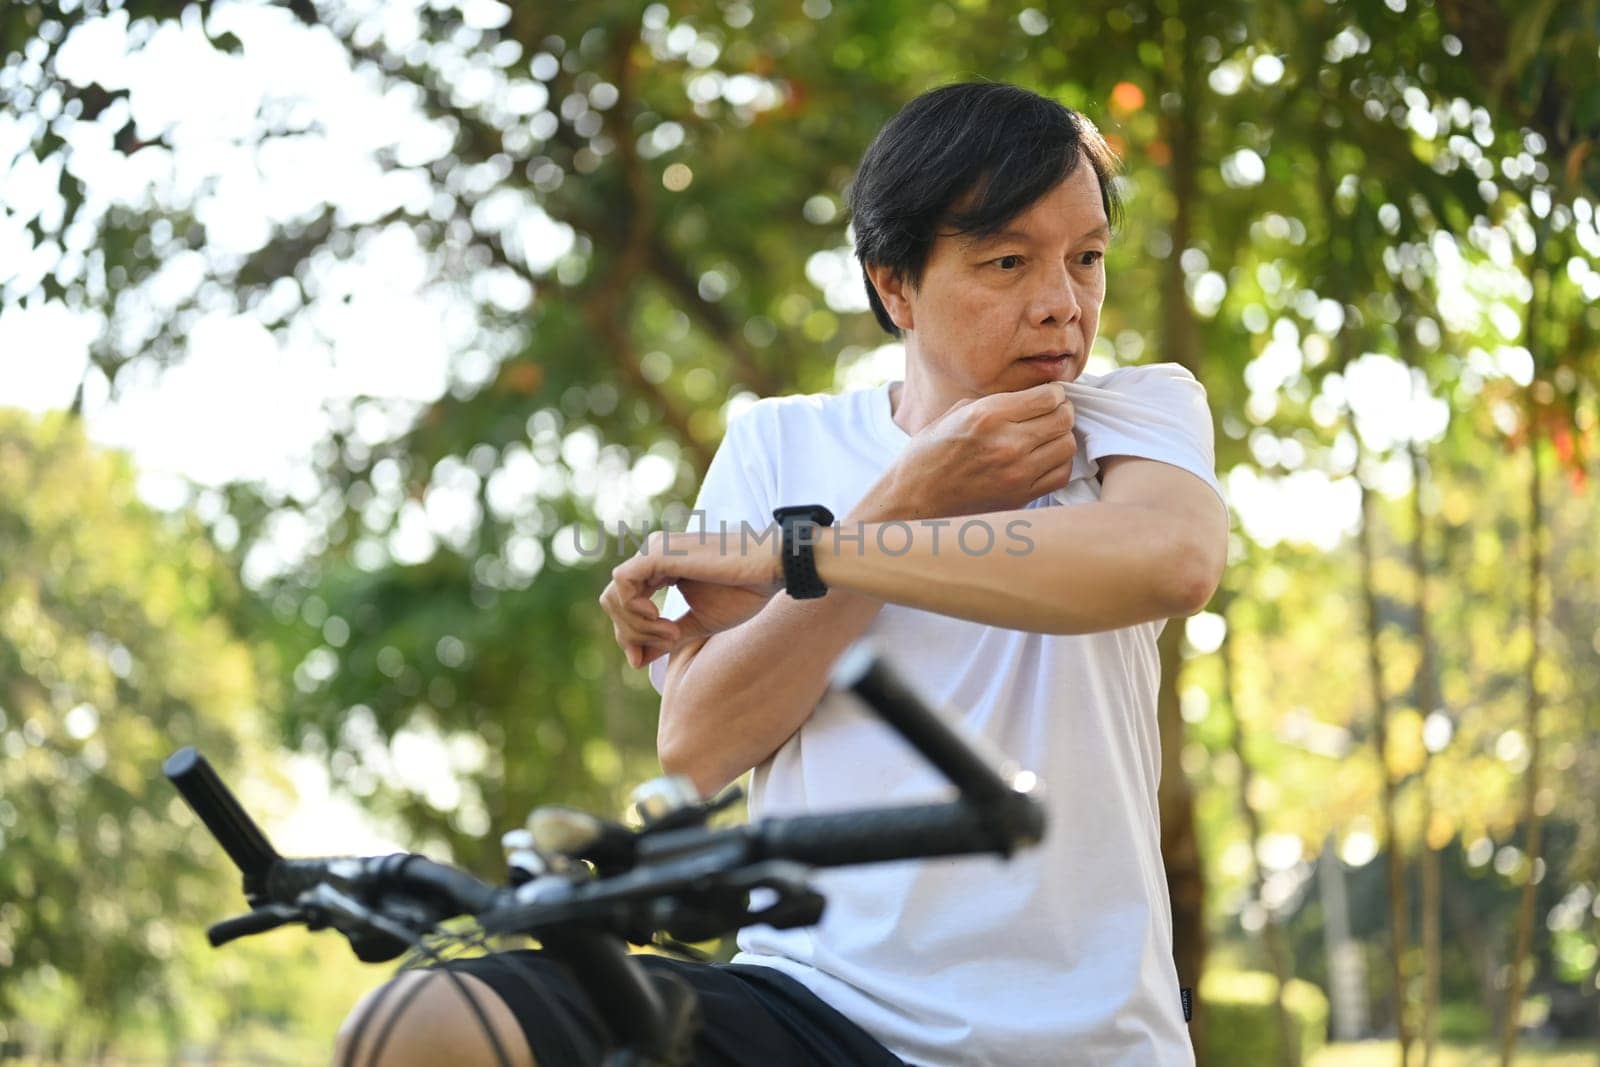 Tired middle age man taking a break from cycling in the park and wiping sweat on his face. by prathanchorruangsak